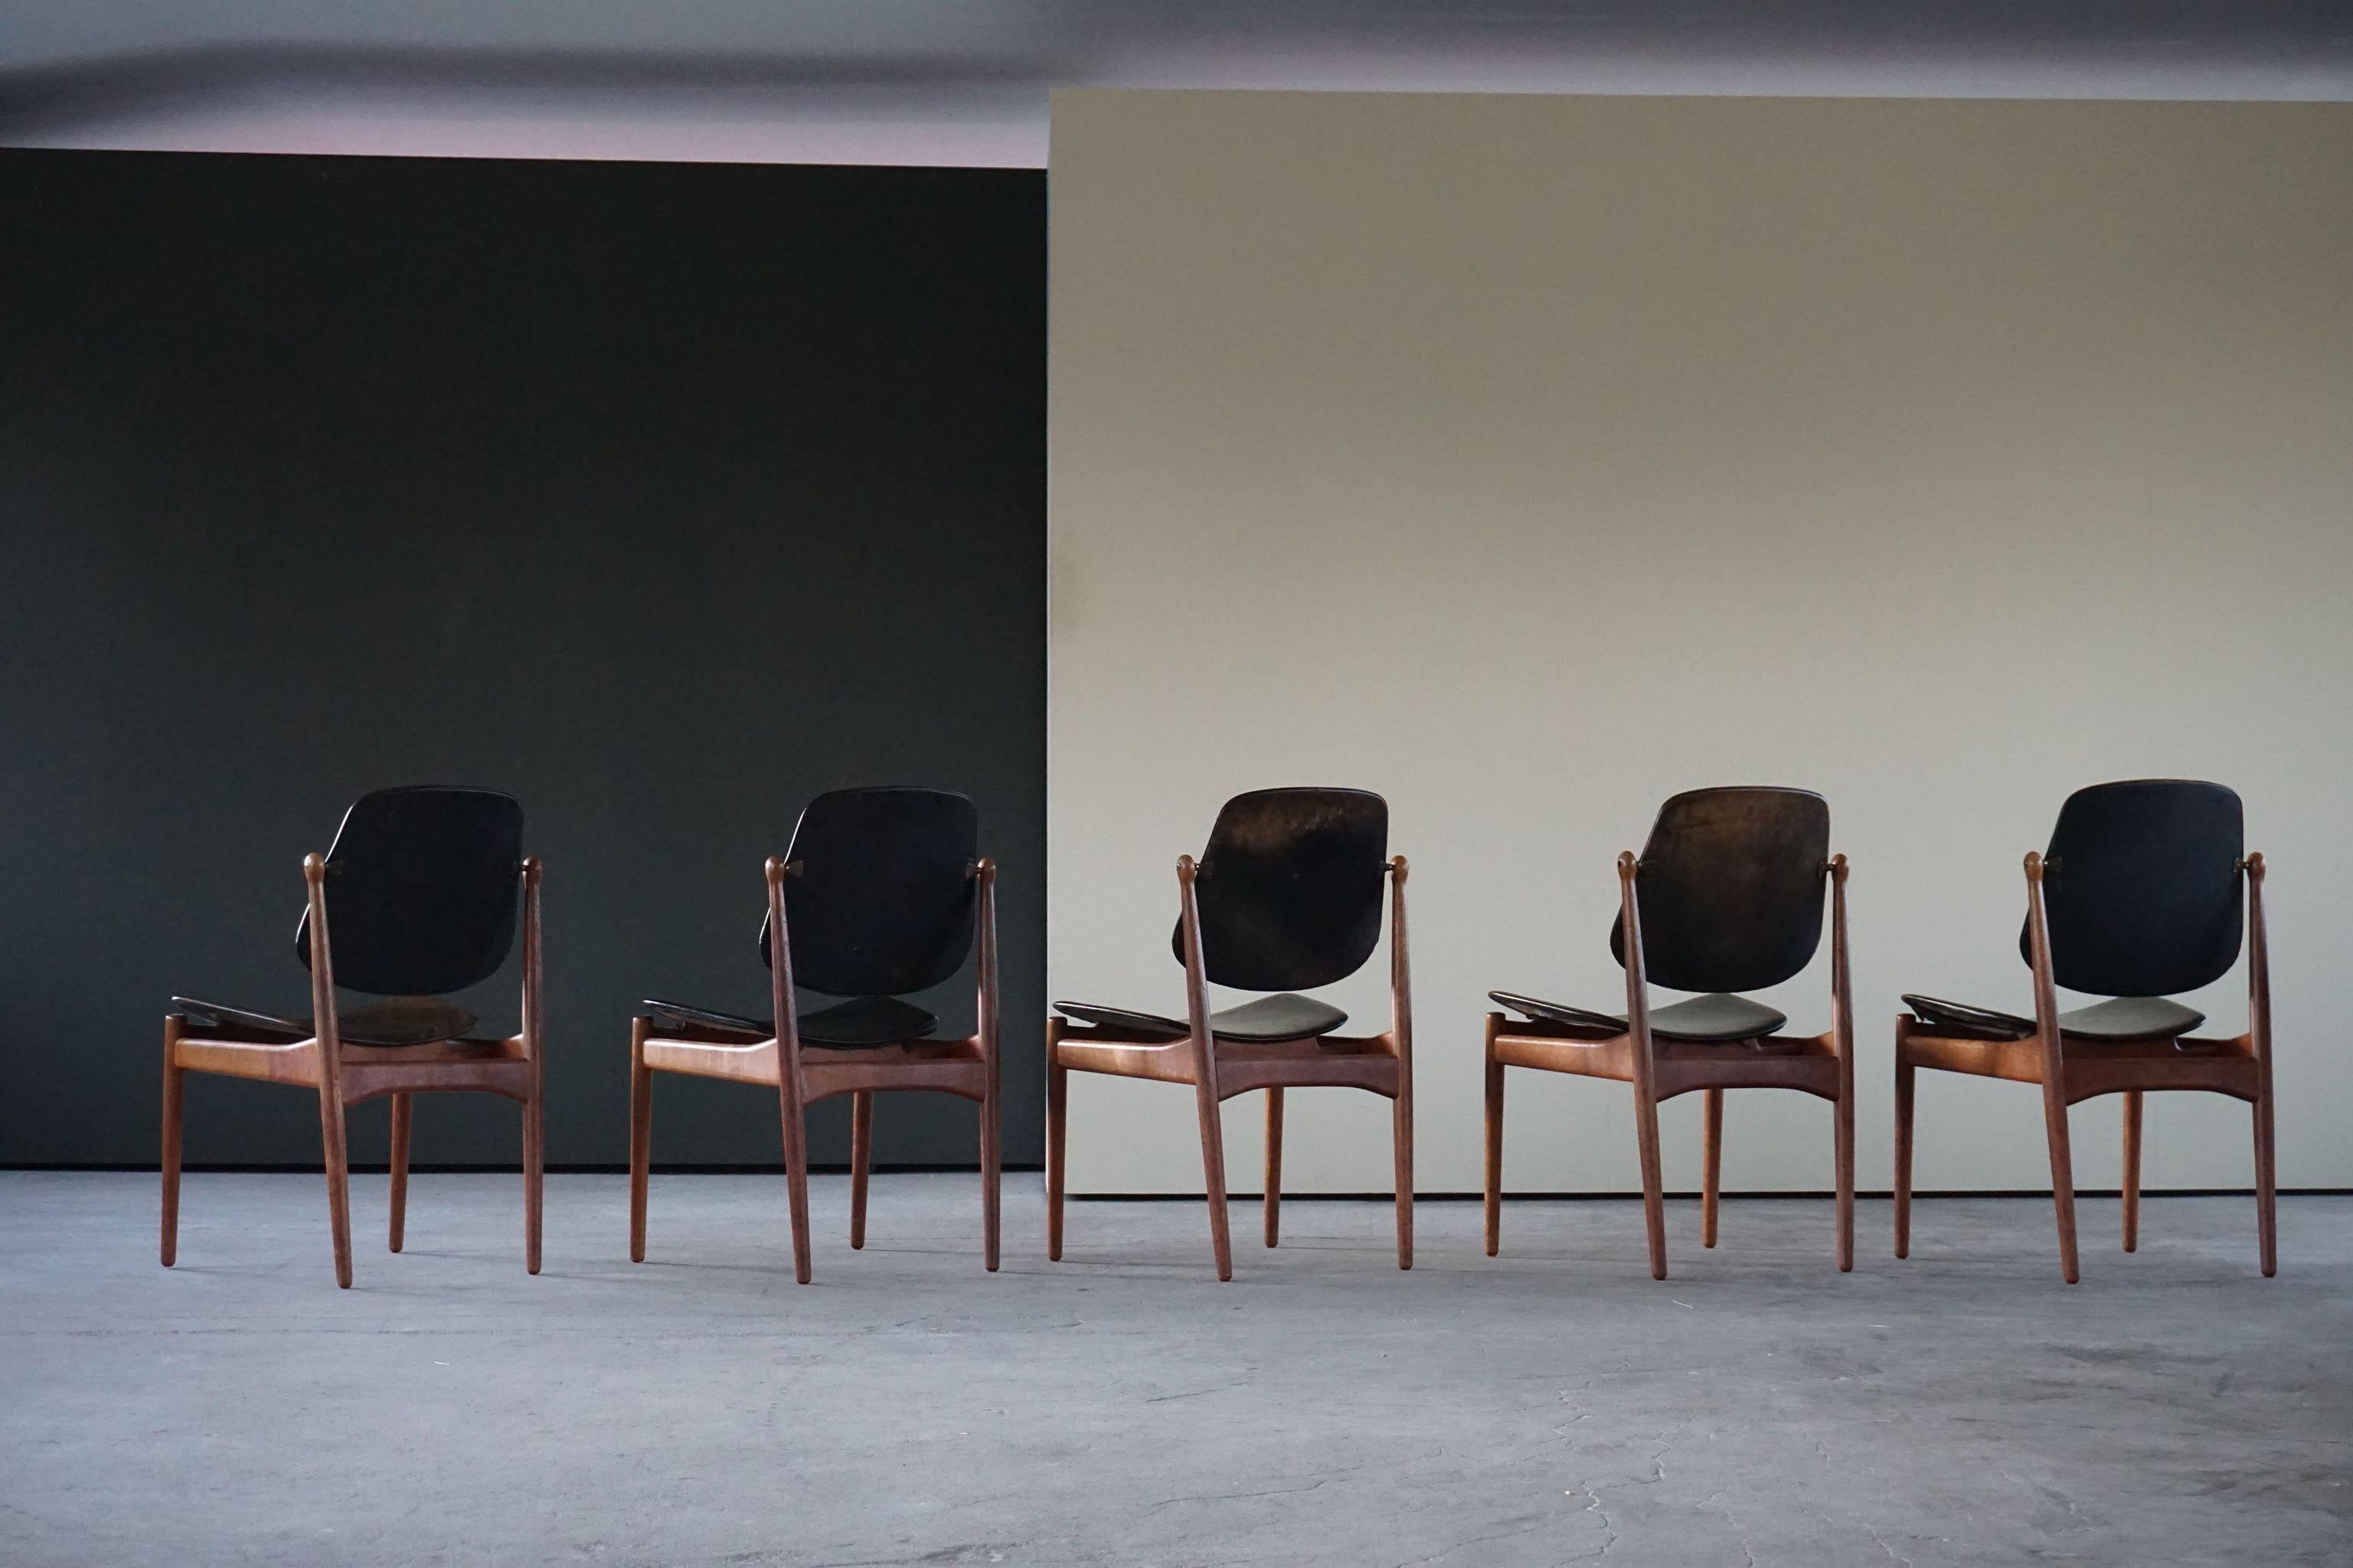 Danish modern dining chairs by Arne Vodder for France & Son, Model FD 183 in teak, 1960s. Set of 5.
The chairs show signs of wear.